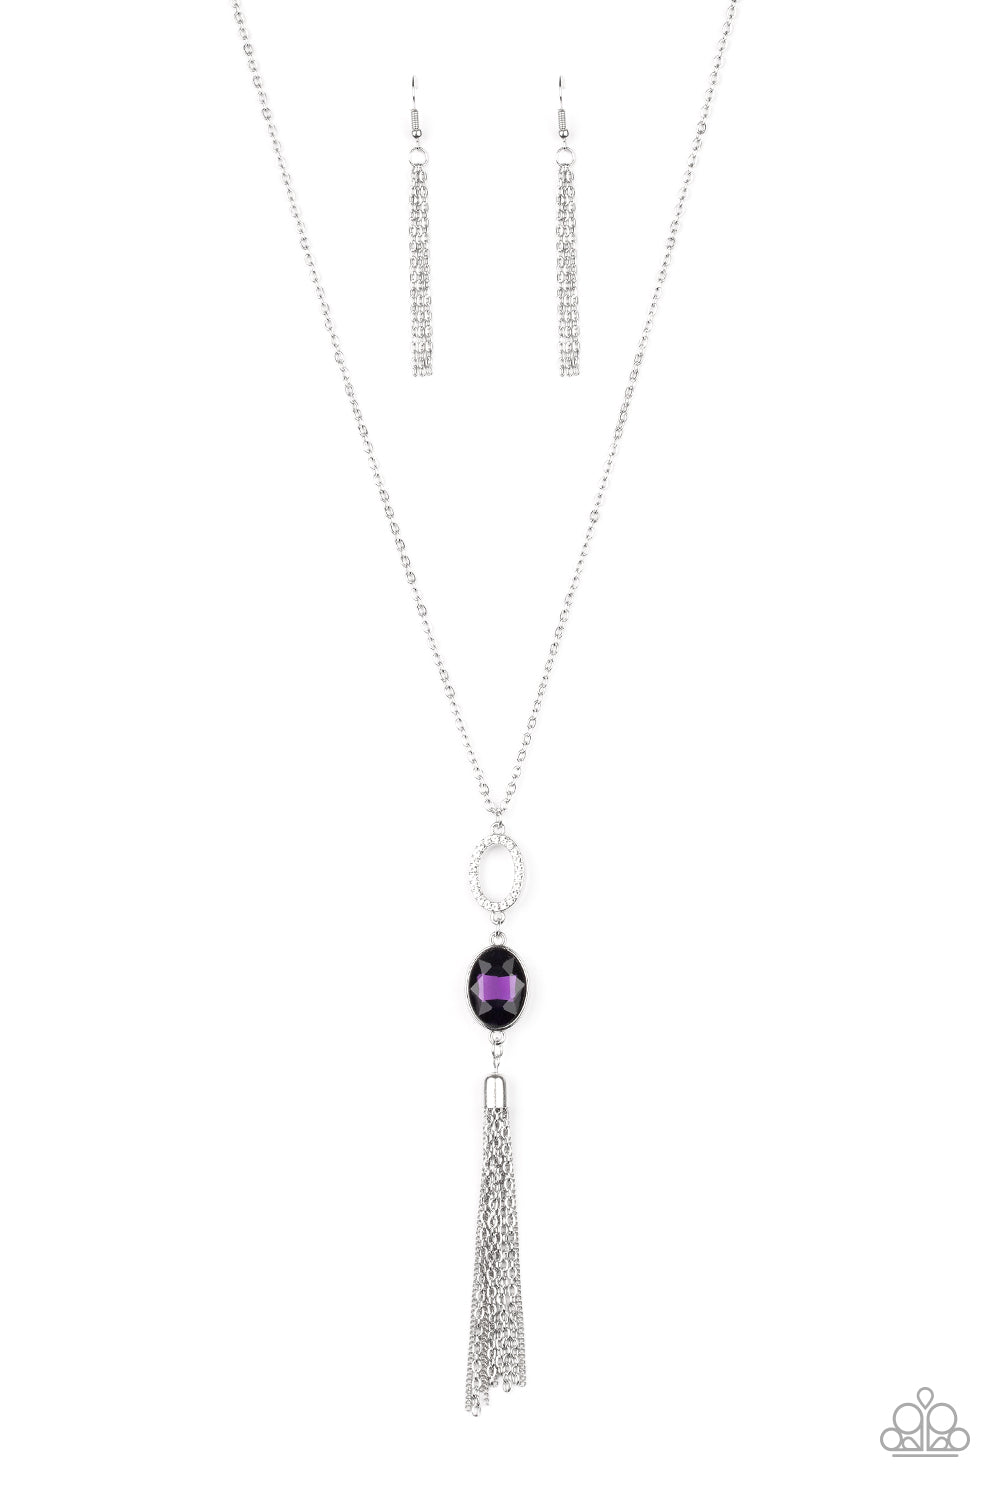 Unstoppable Glamour - Purple Necklace